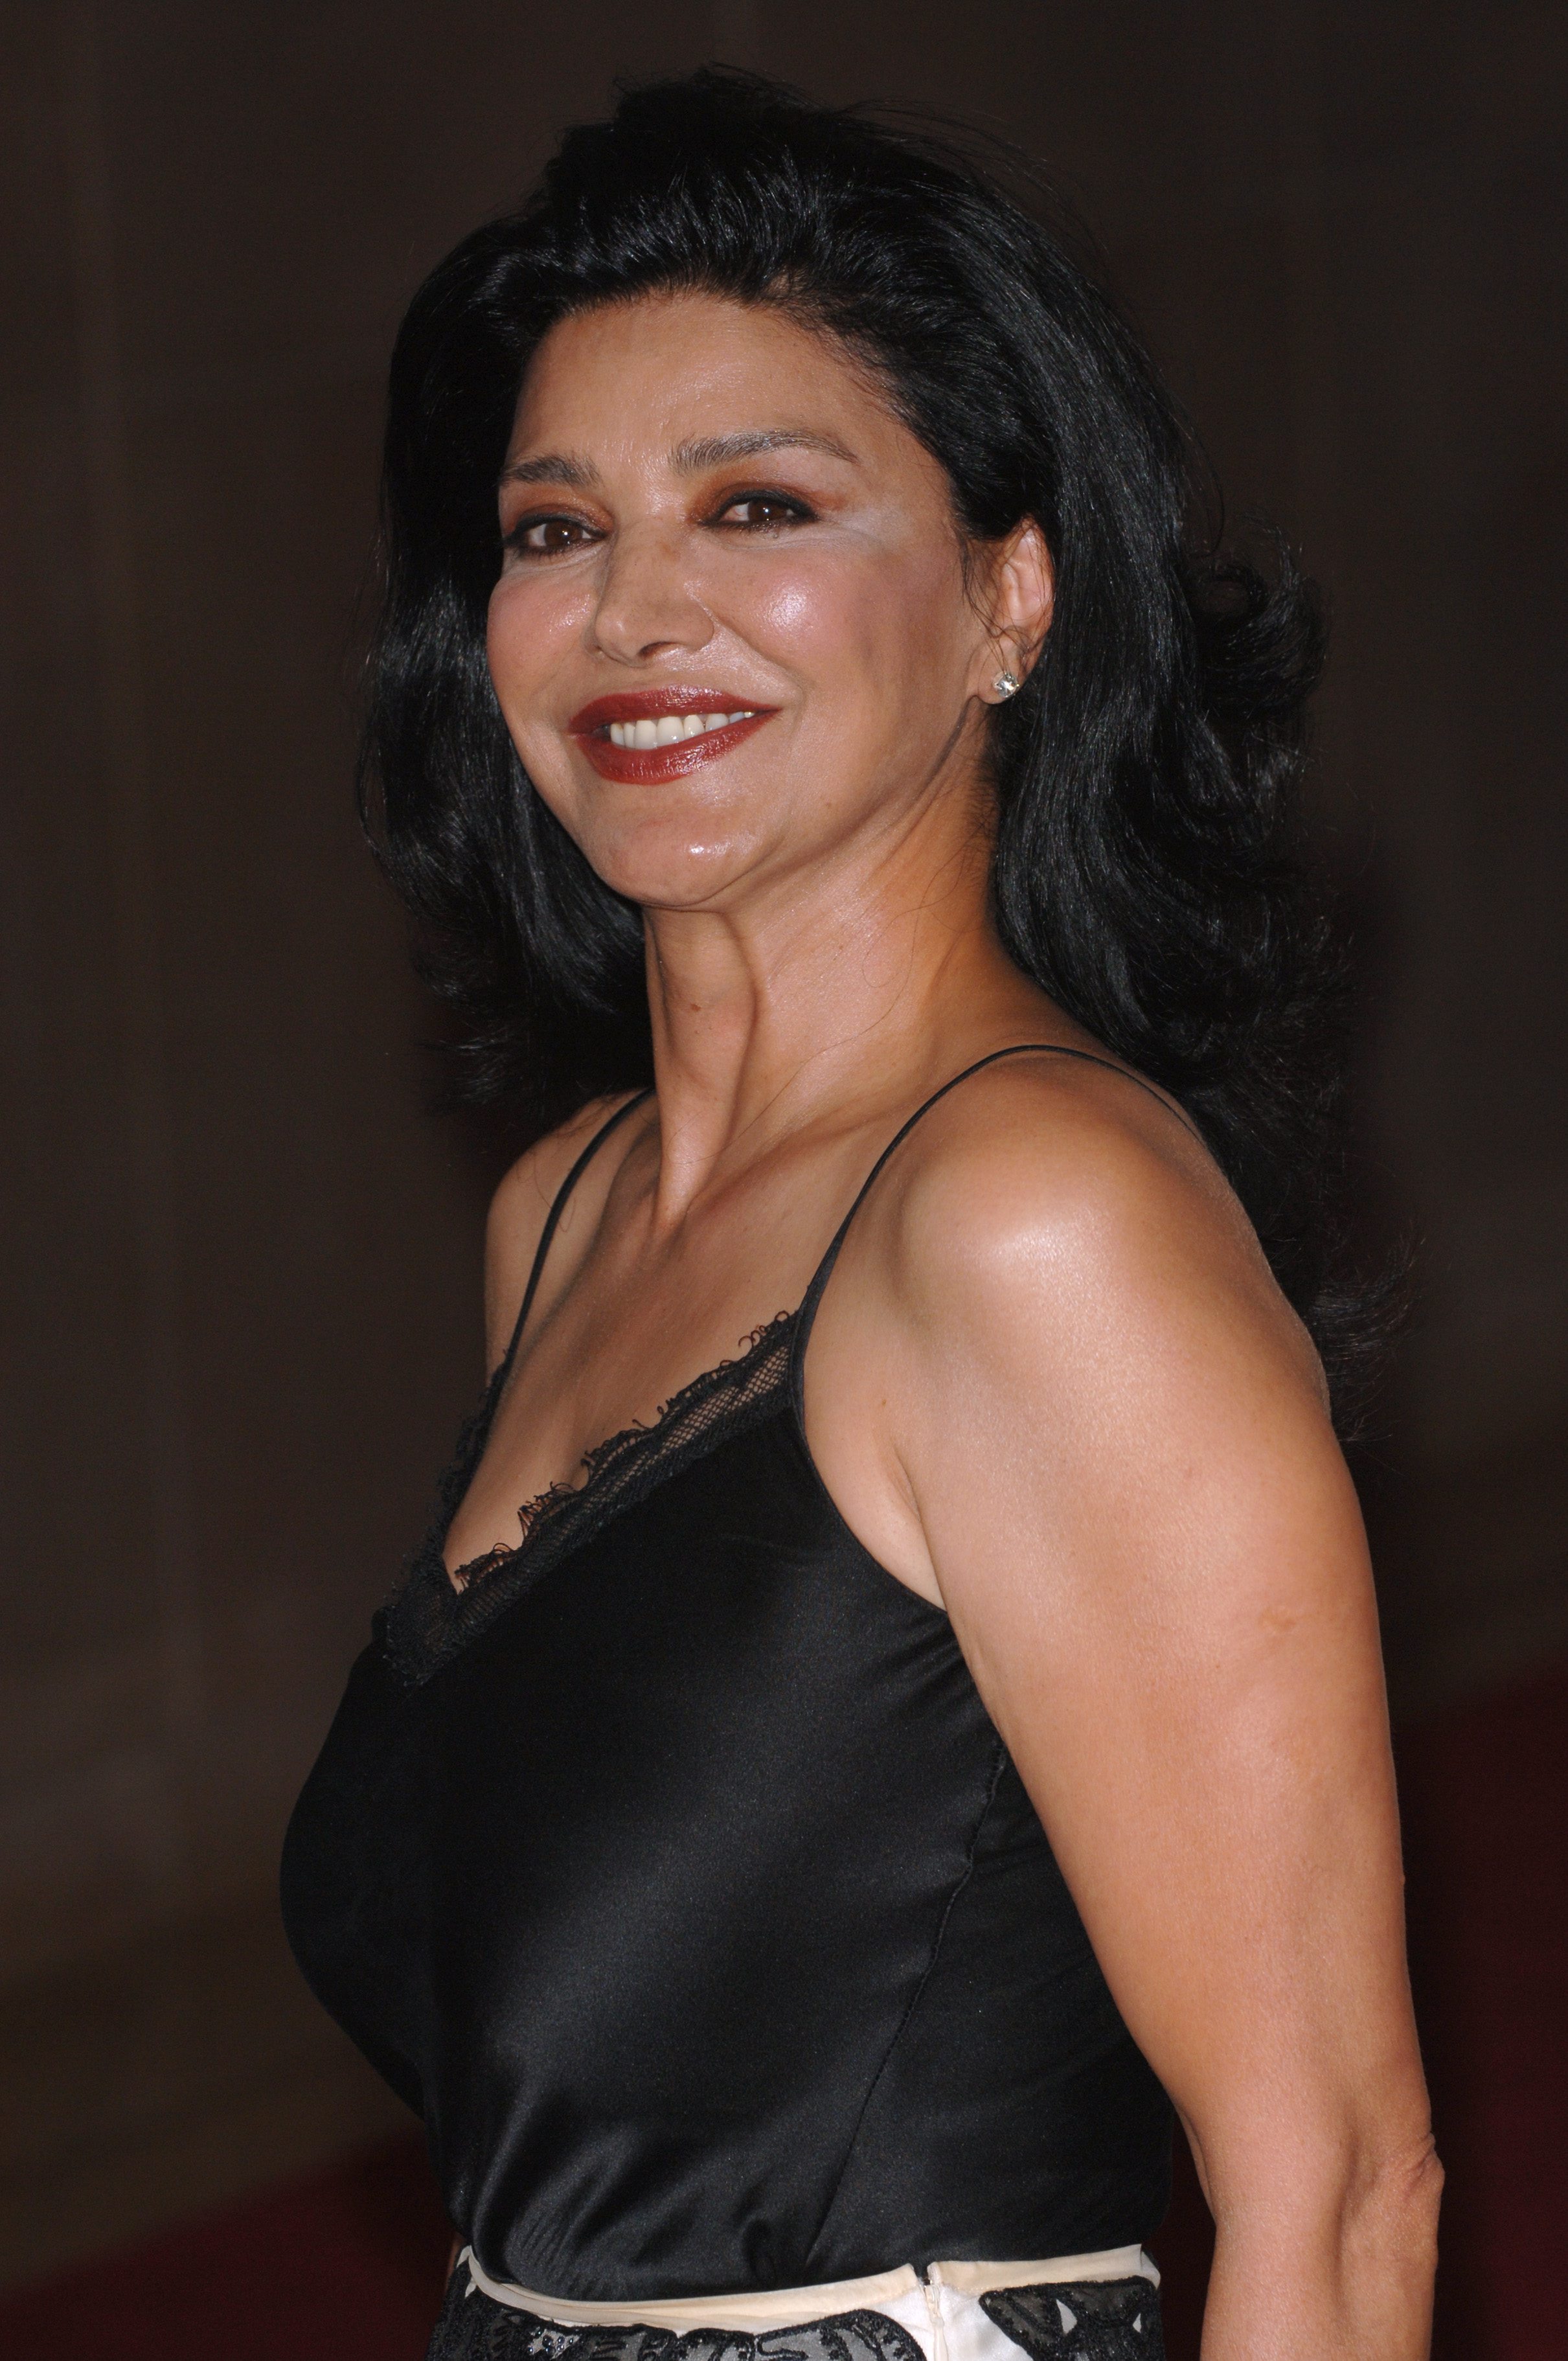 Download this Shohreh Aghdashloo picture